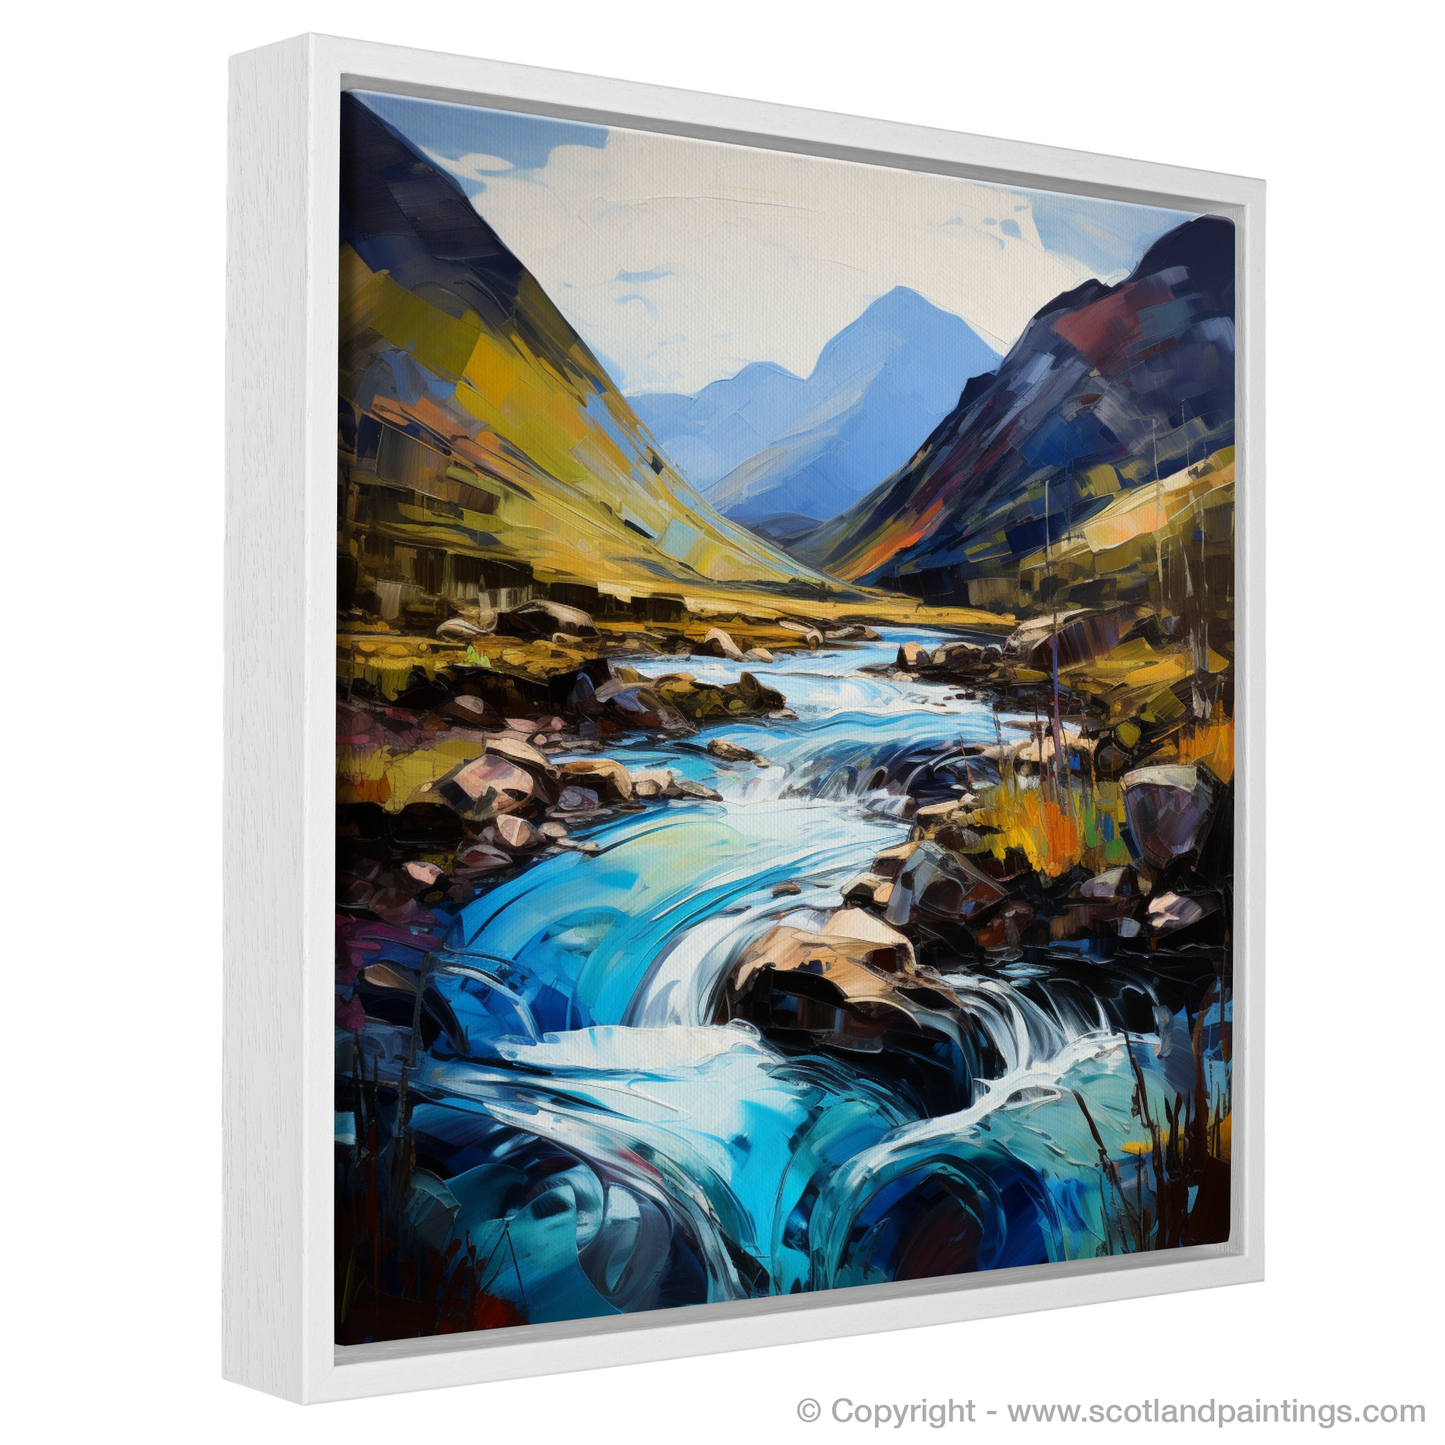 Painting and Art Print of River Coe, Glencoe, Highlands entitled "Whispers of Glencoe: An Expressionist Ode to River Coe".